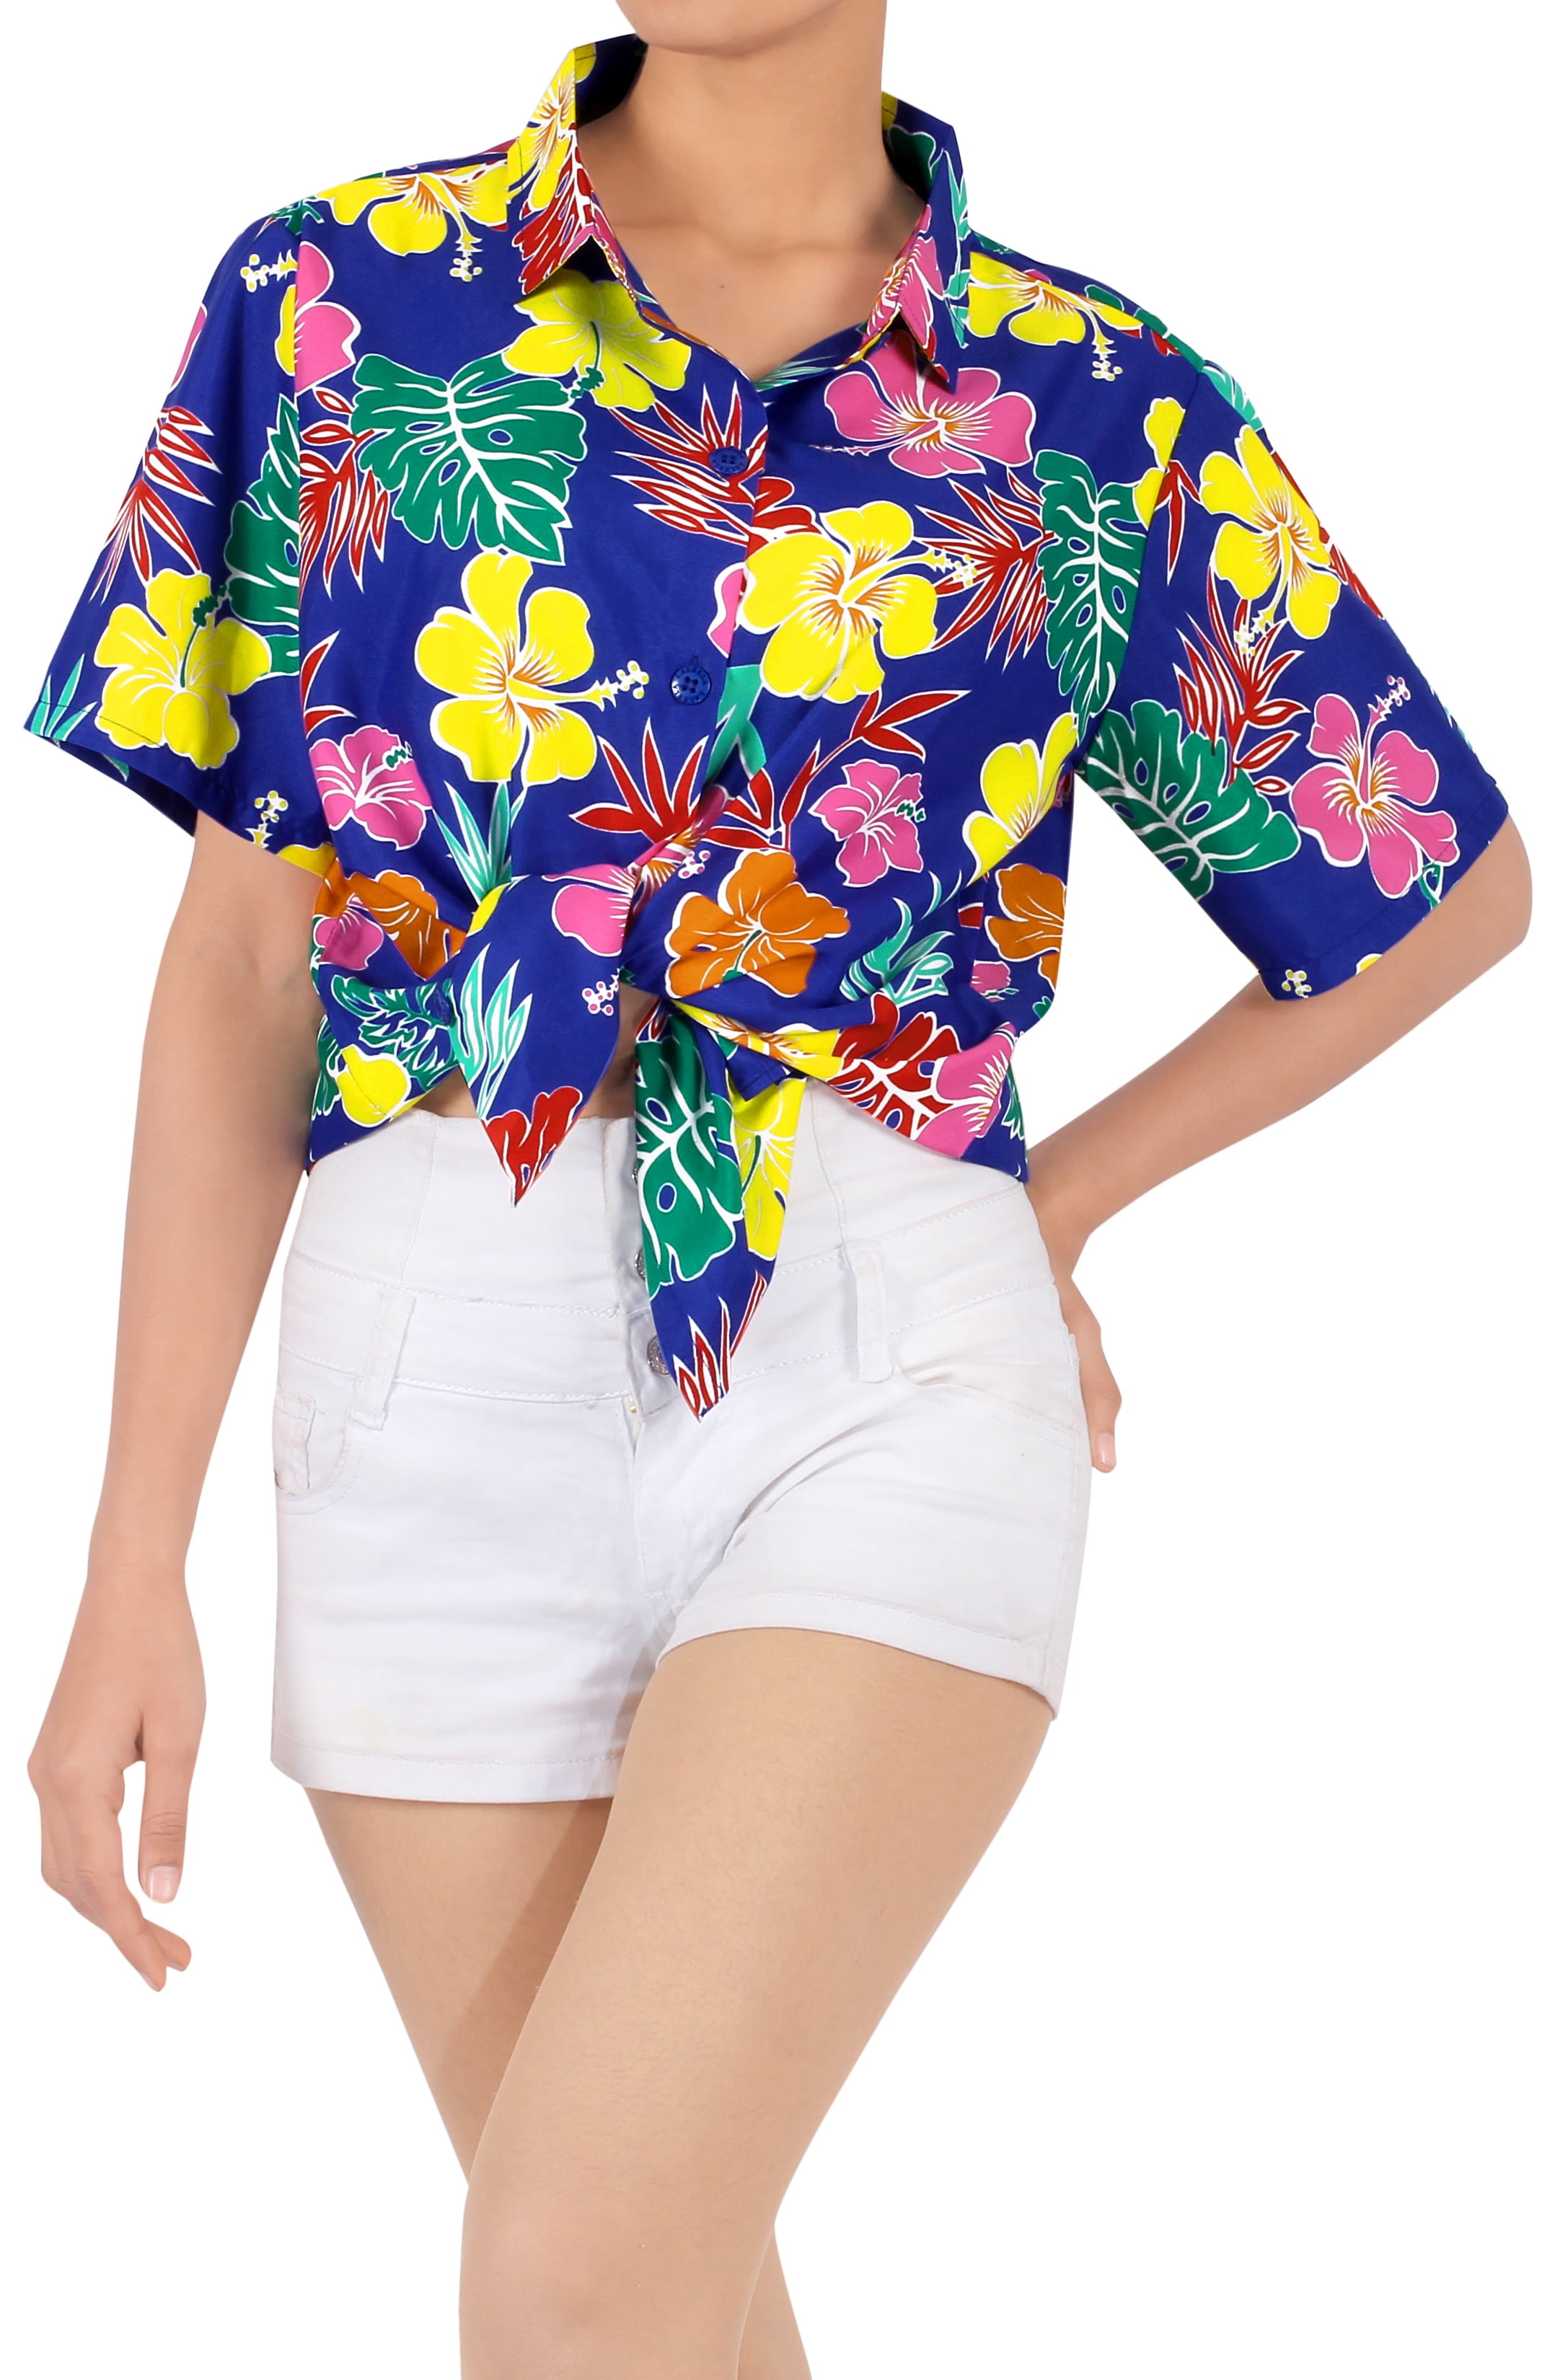 hawaii outfit for ladies - ALL Korean